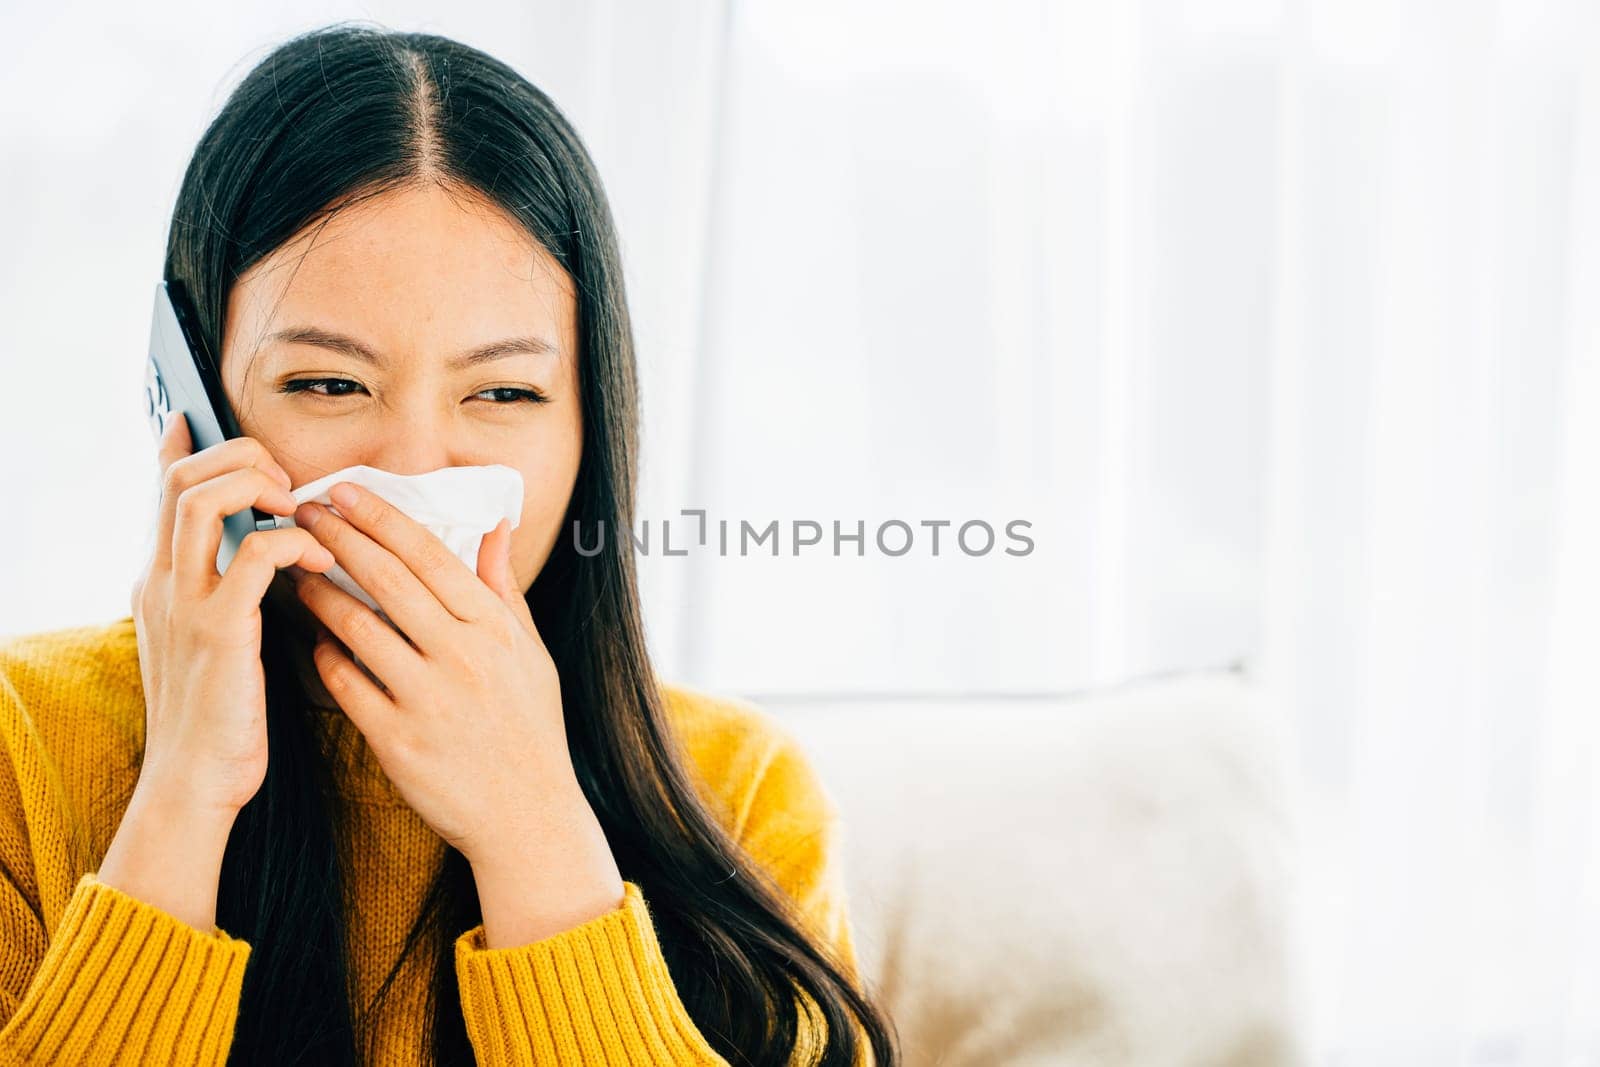 Amidst blowing wiping nose sneezing on sofa a sick female contacts doctor. An ill young girl discusses influenza symptoms with practitioner via phone seeking medicine. Conveying patient care at home.